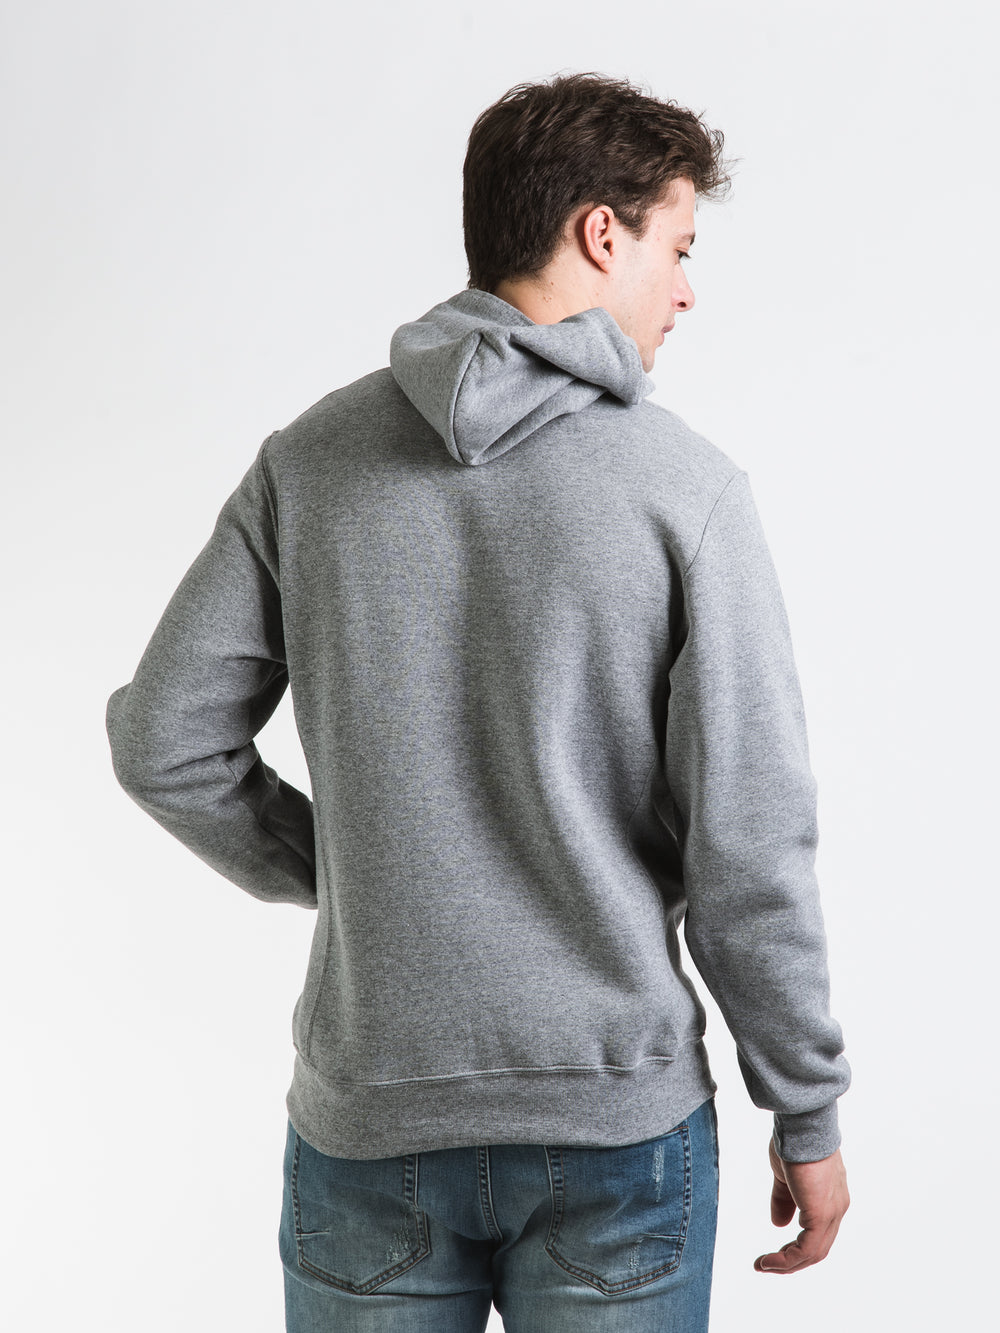 RUSSELL NYU PULLOVER HOODIE - CLEARANCE